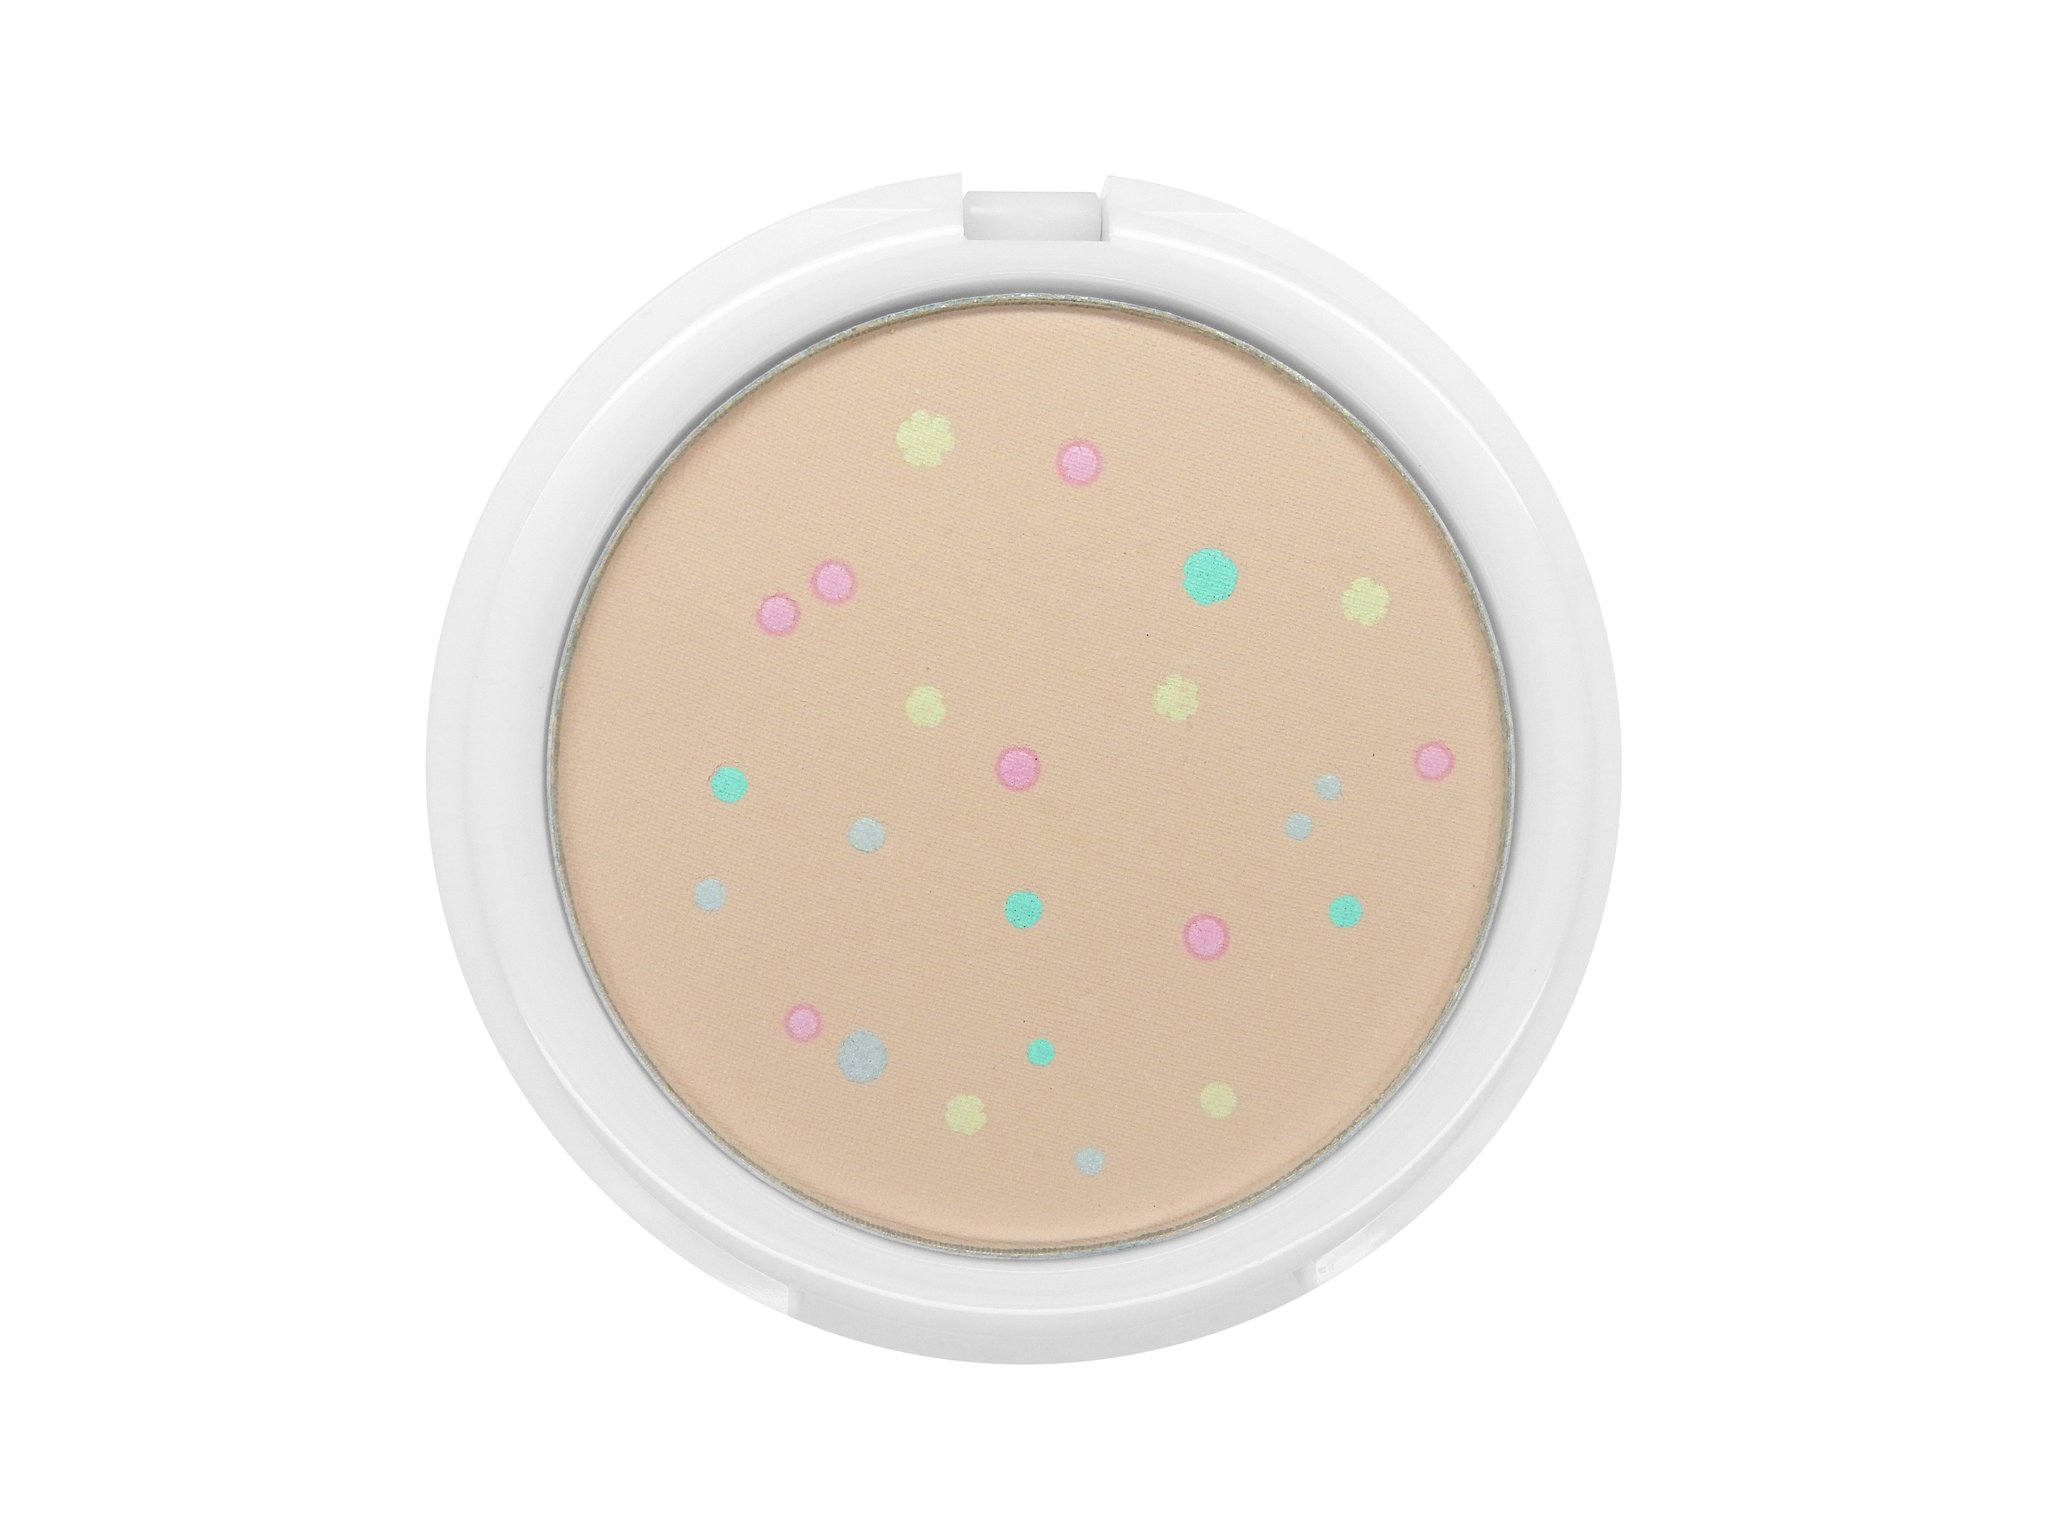 W7 Flawless face pressed mineral powder